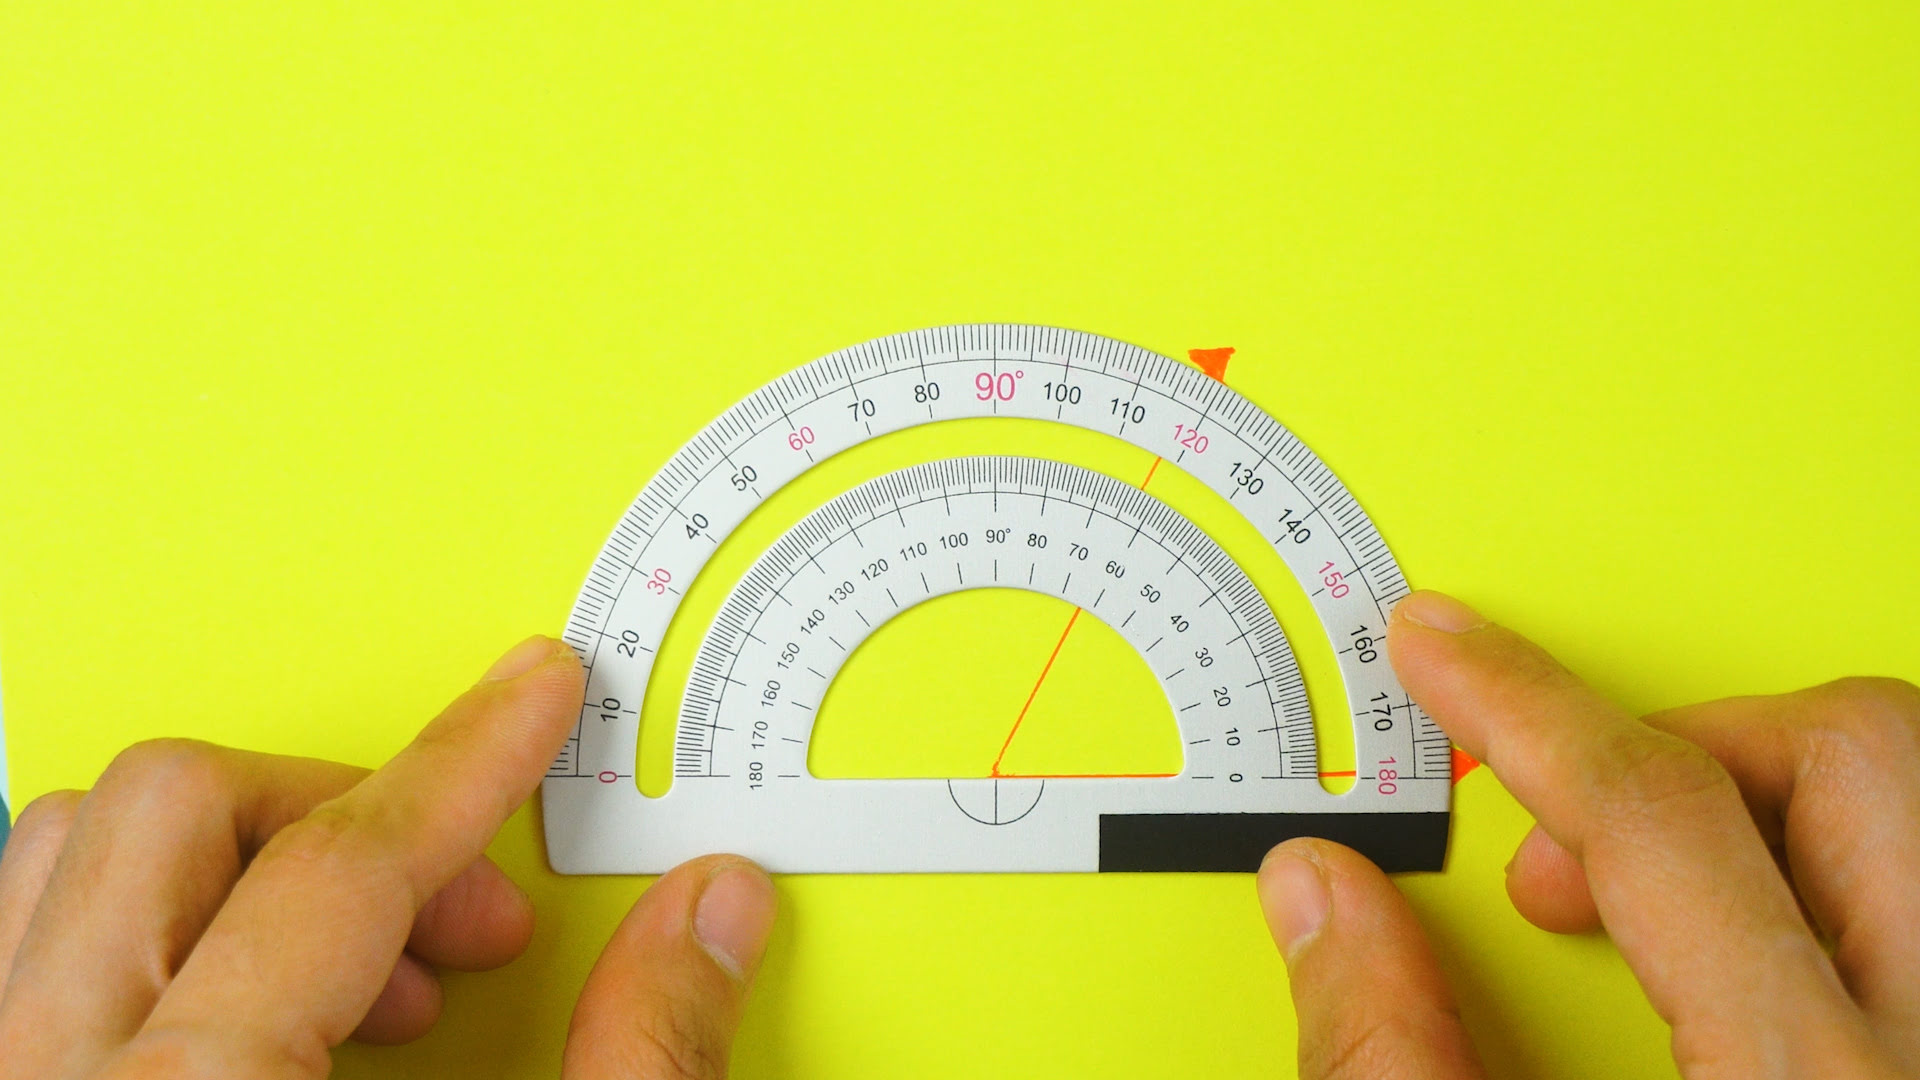 How To Use Protractor To Measure Angles